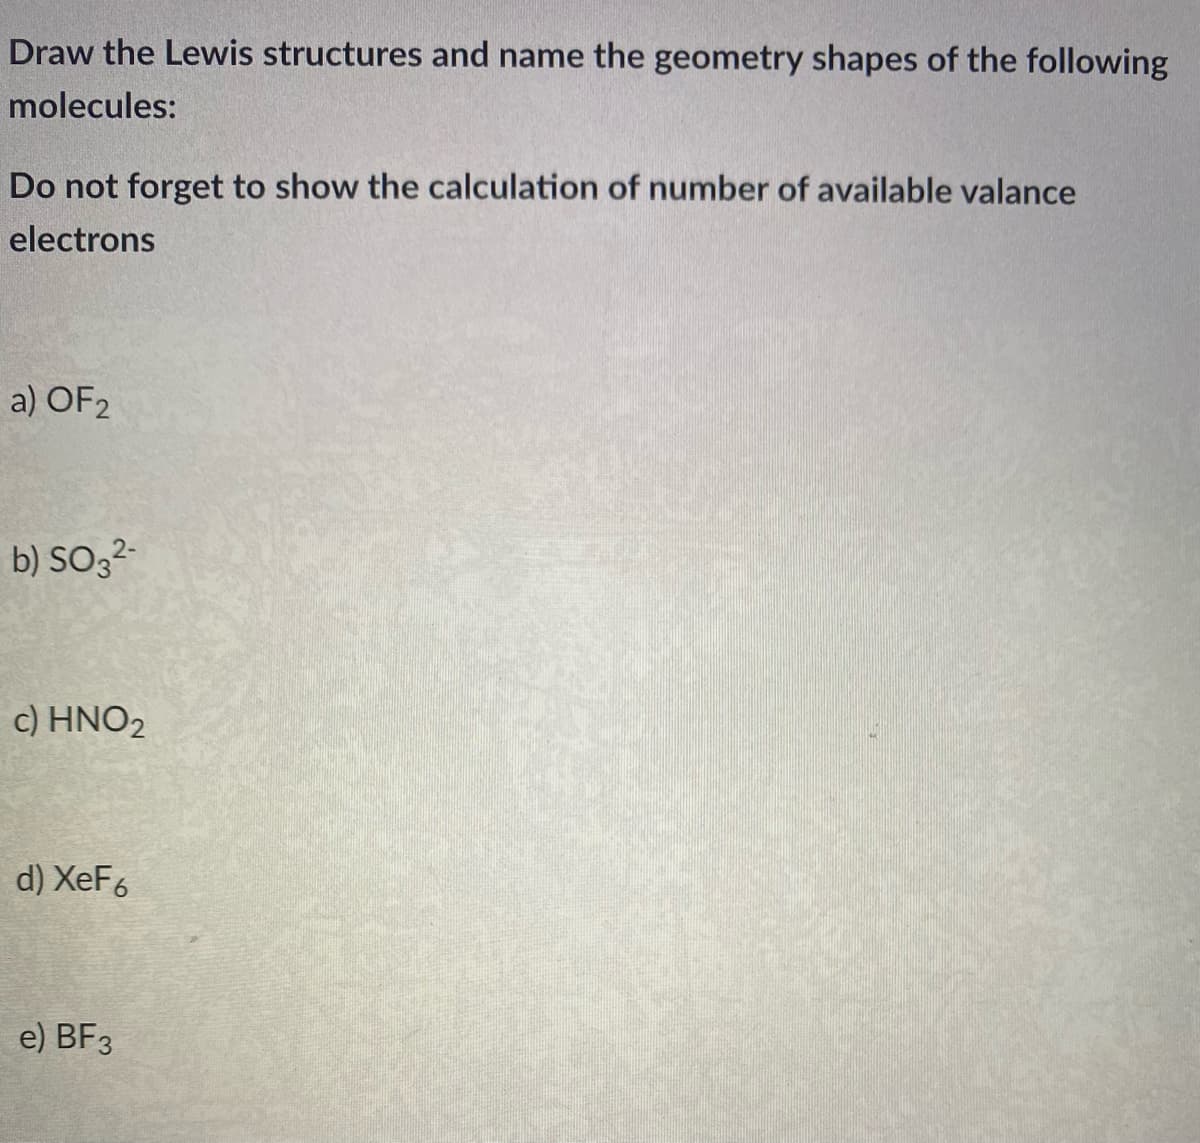 Draw the Lewis structures and name the geometry shapes of the following
molecules:
Do not forget to show the calculation of number of available valance
electrons
a) OF2
b) SO32-
c) HNO2
d) XeF6
e) BF3
